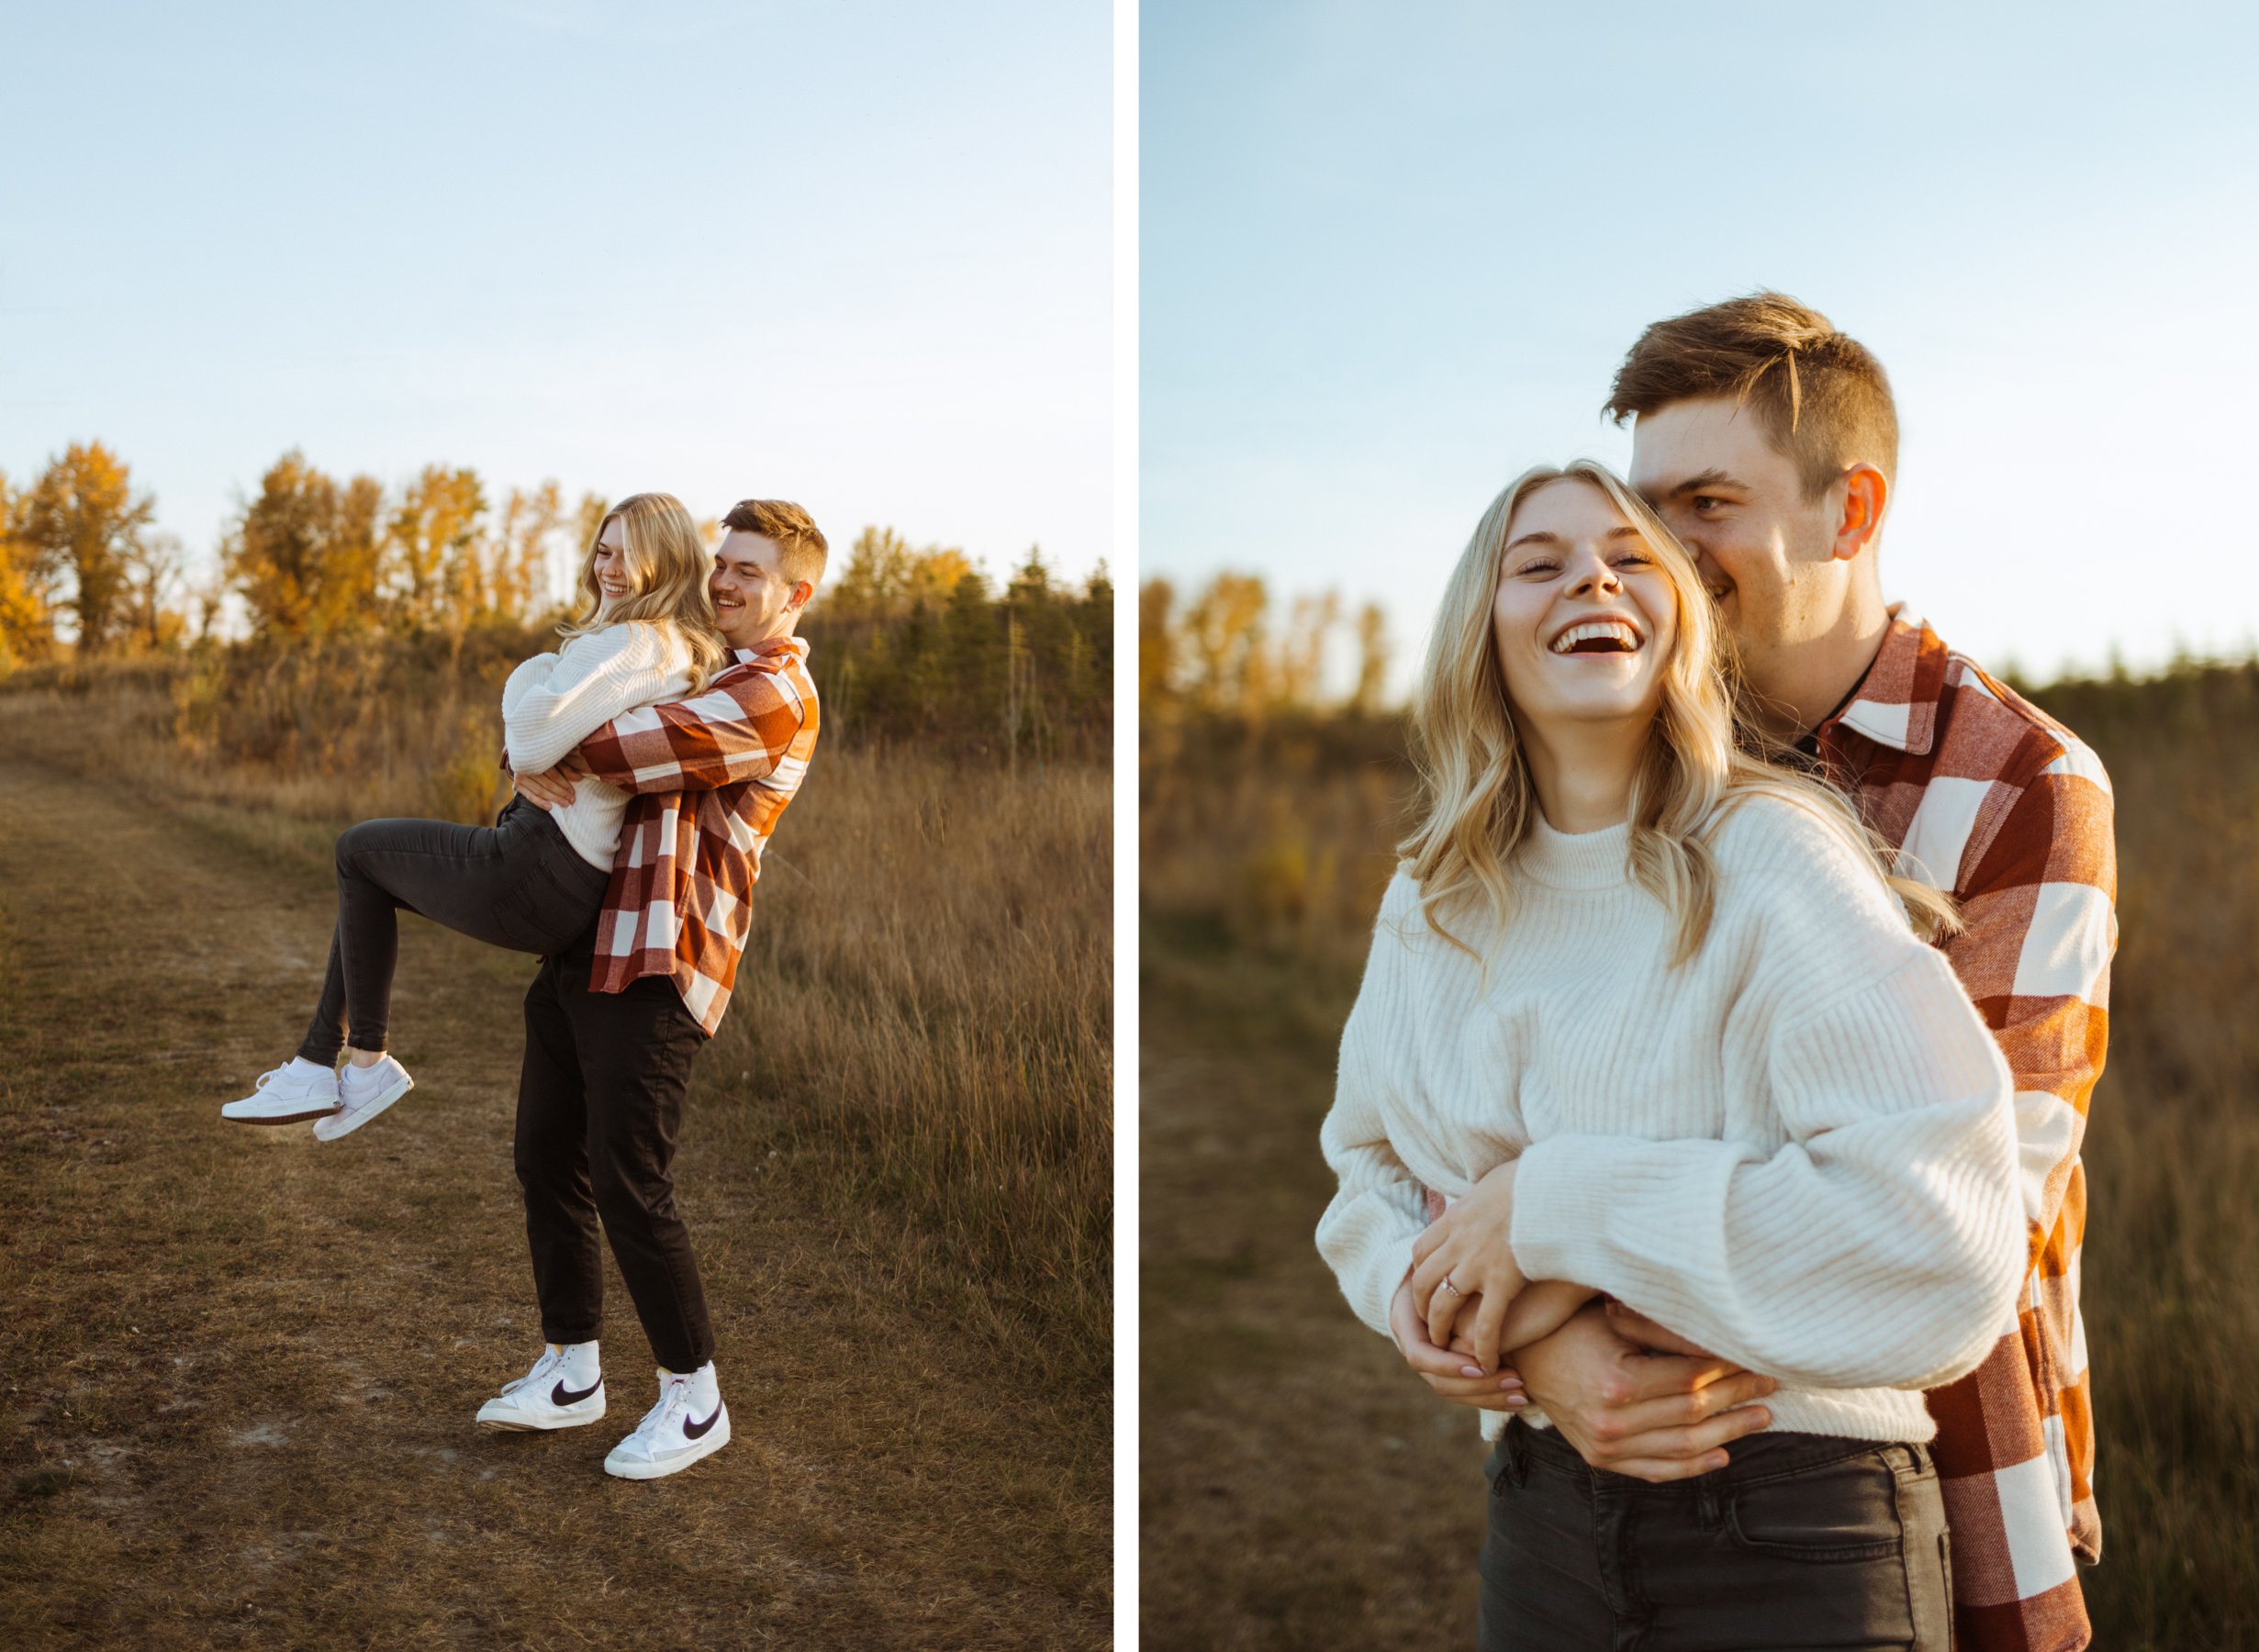 Calgary-wedding-photographer-love-and-be-loved-photography-Matthew-Kyra-Fish-Creek-Park-Fall-Engagement-Session-8.jpg